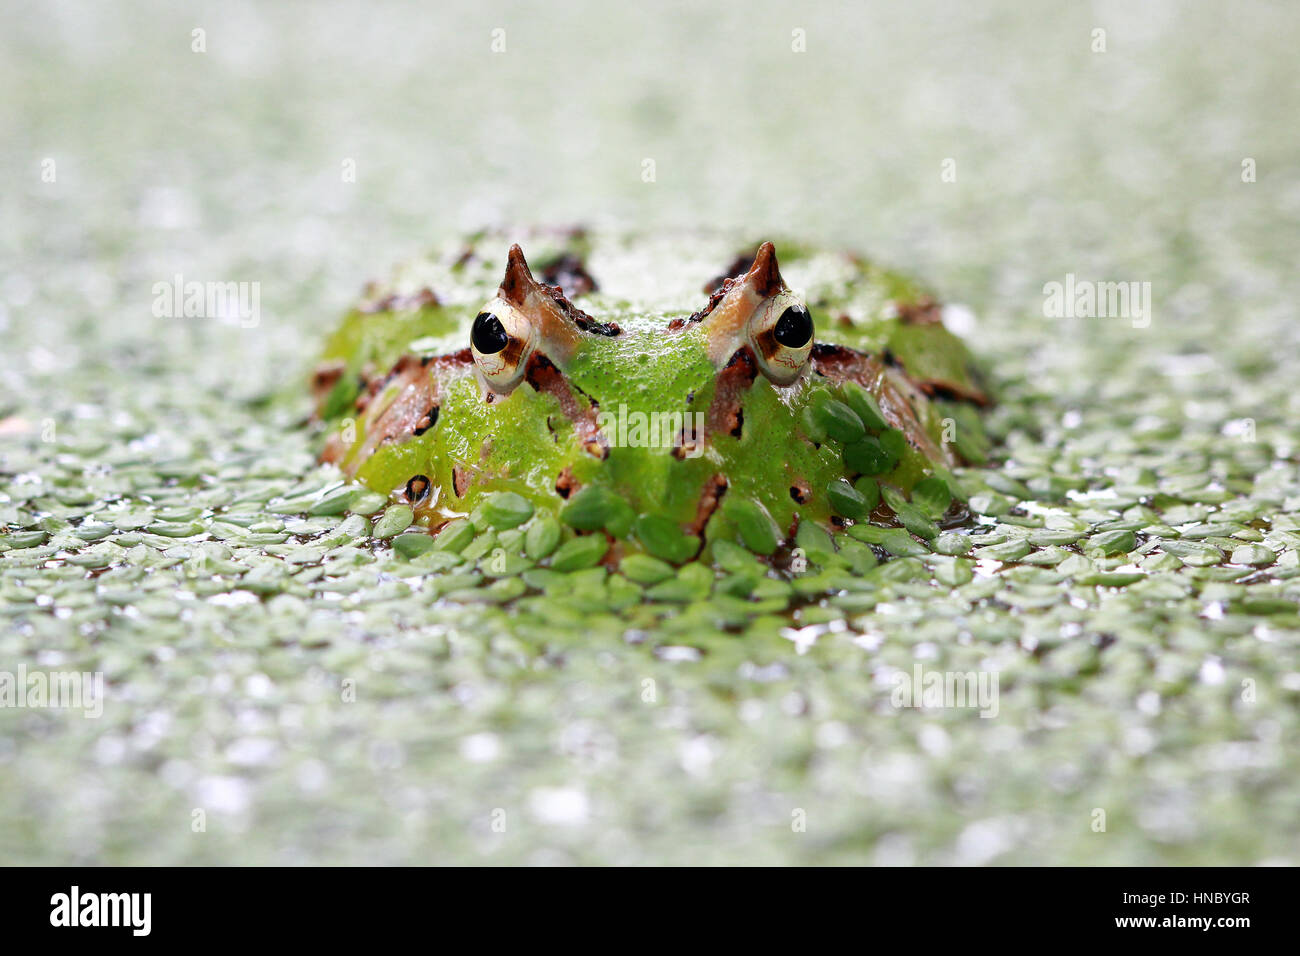 Pacman frog submerged in duckweed, Indonesia Stock Photo